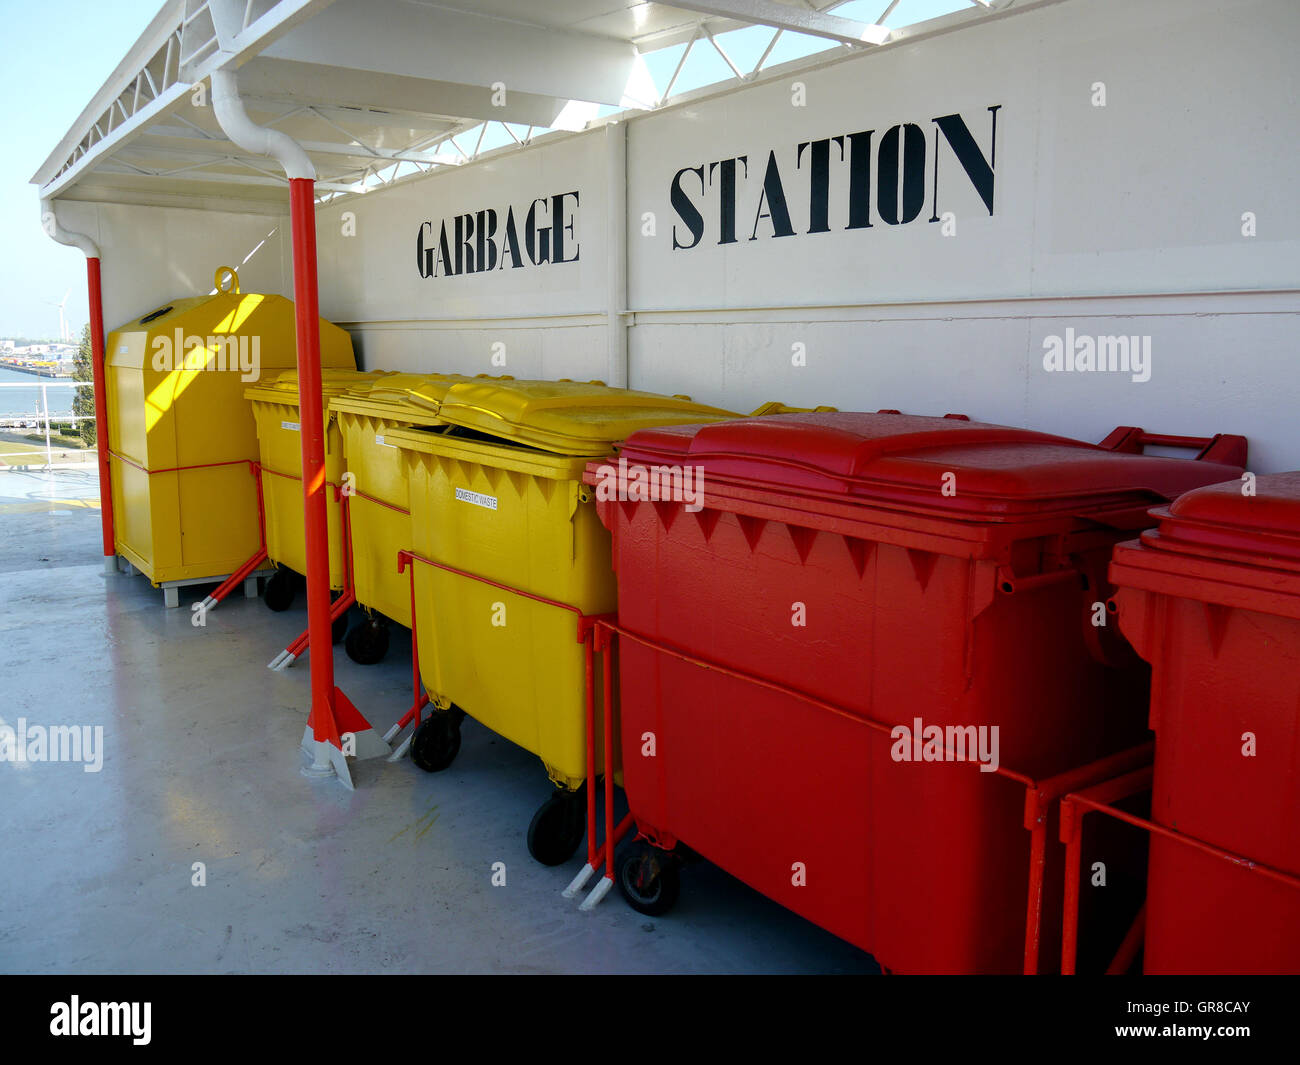 Garbage Station On A Freighter Stock Photo